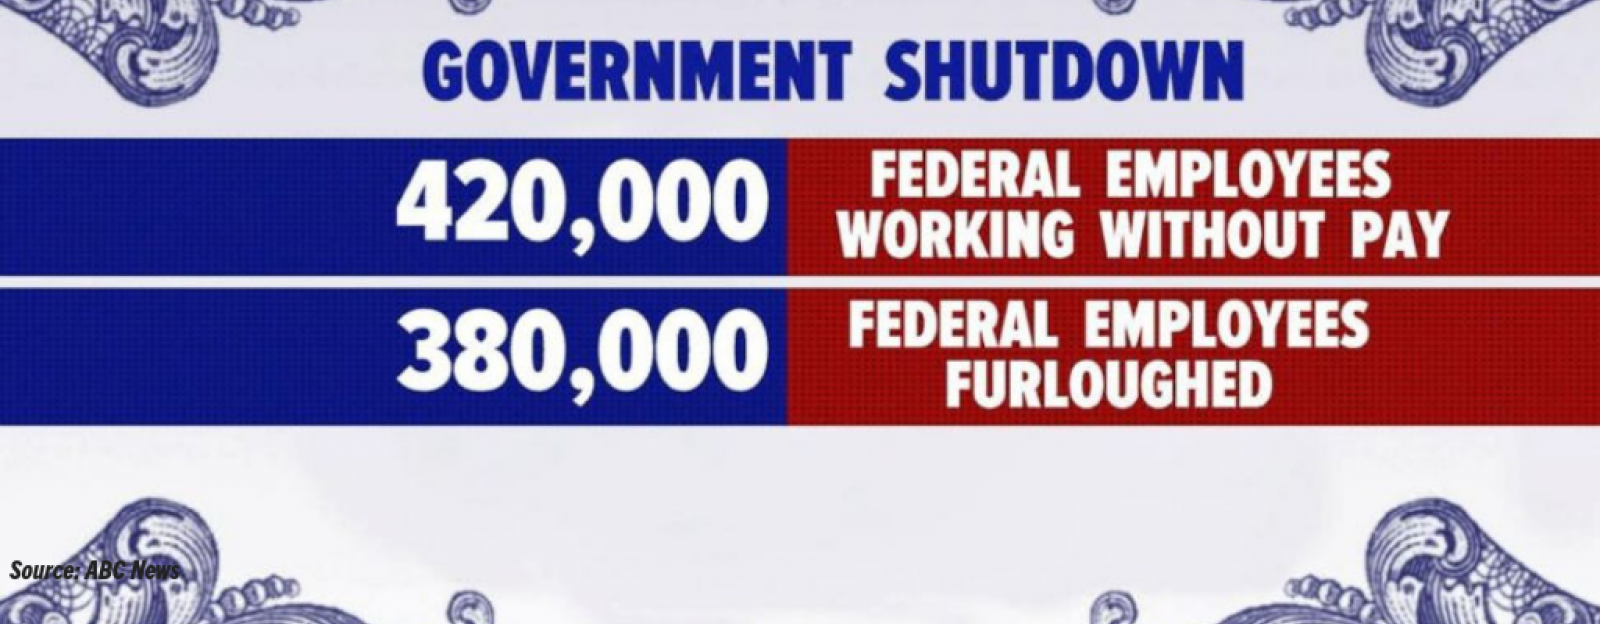 Resources for Those Impacted by the Federal Government Shutdown